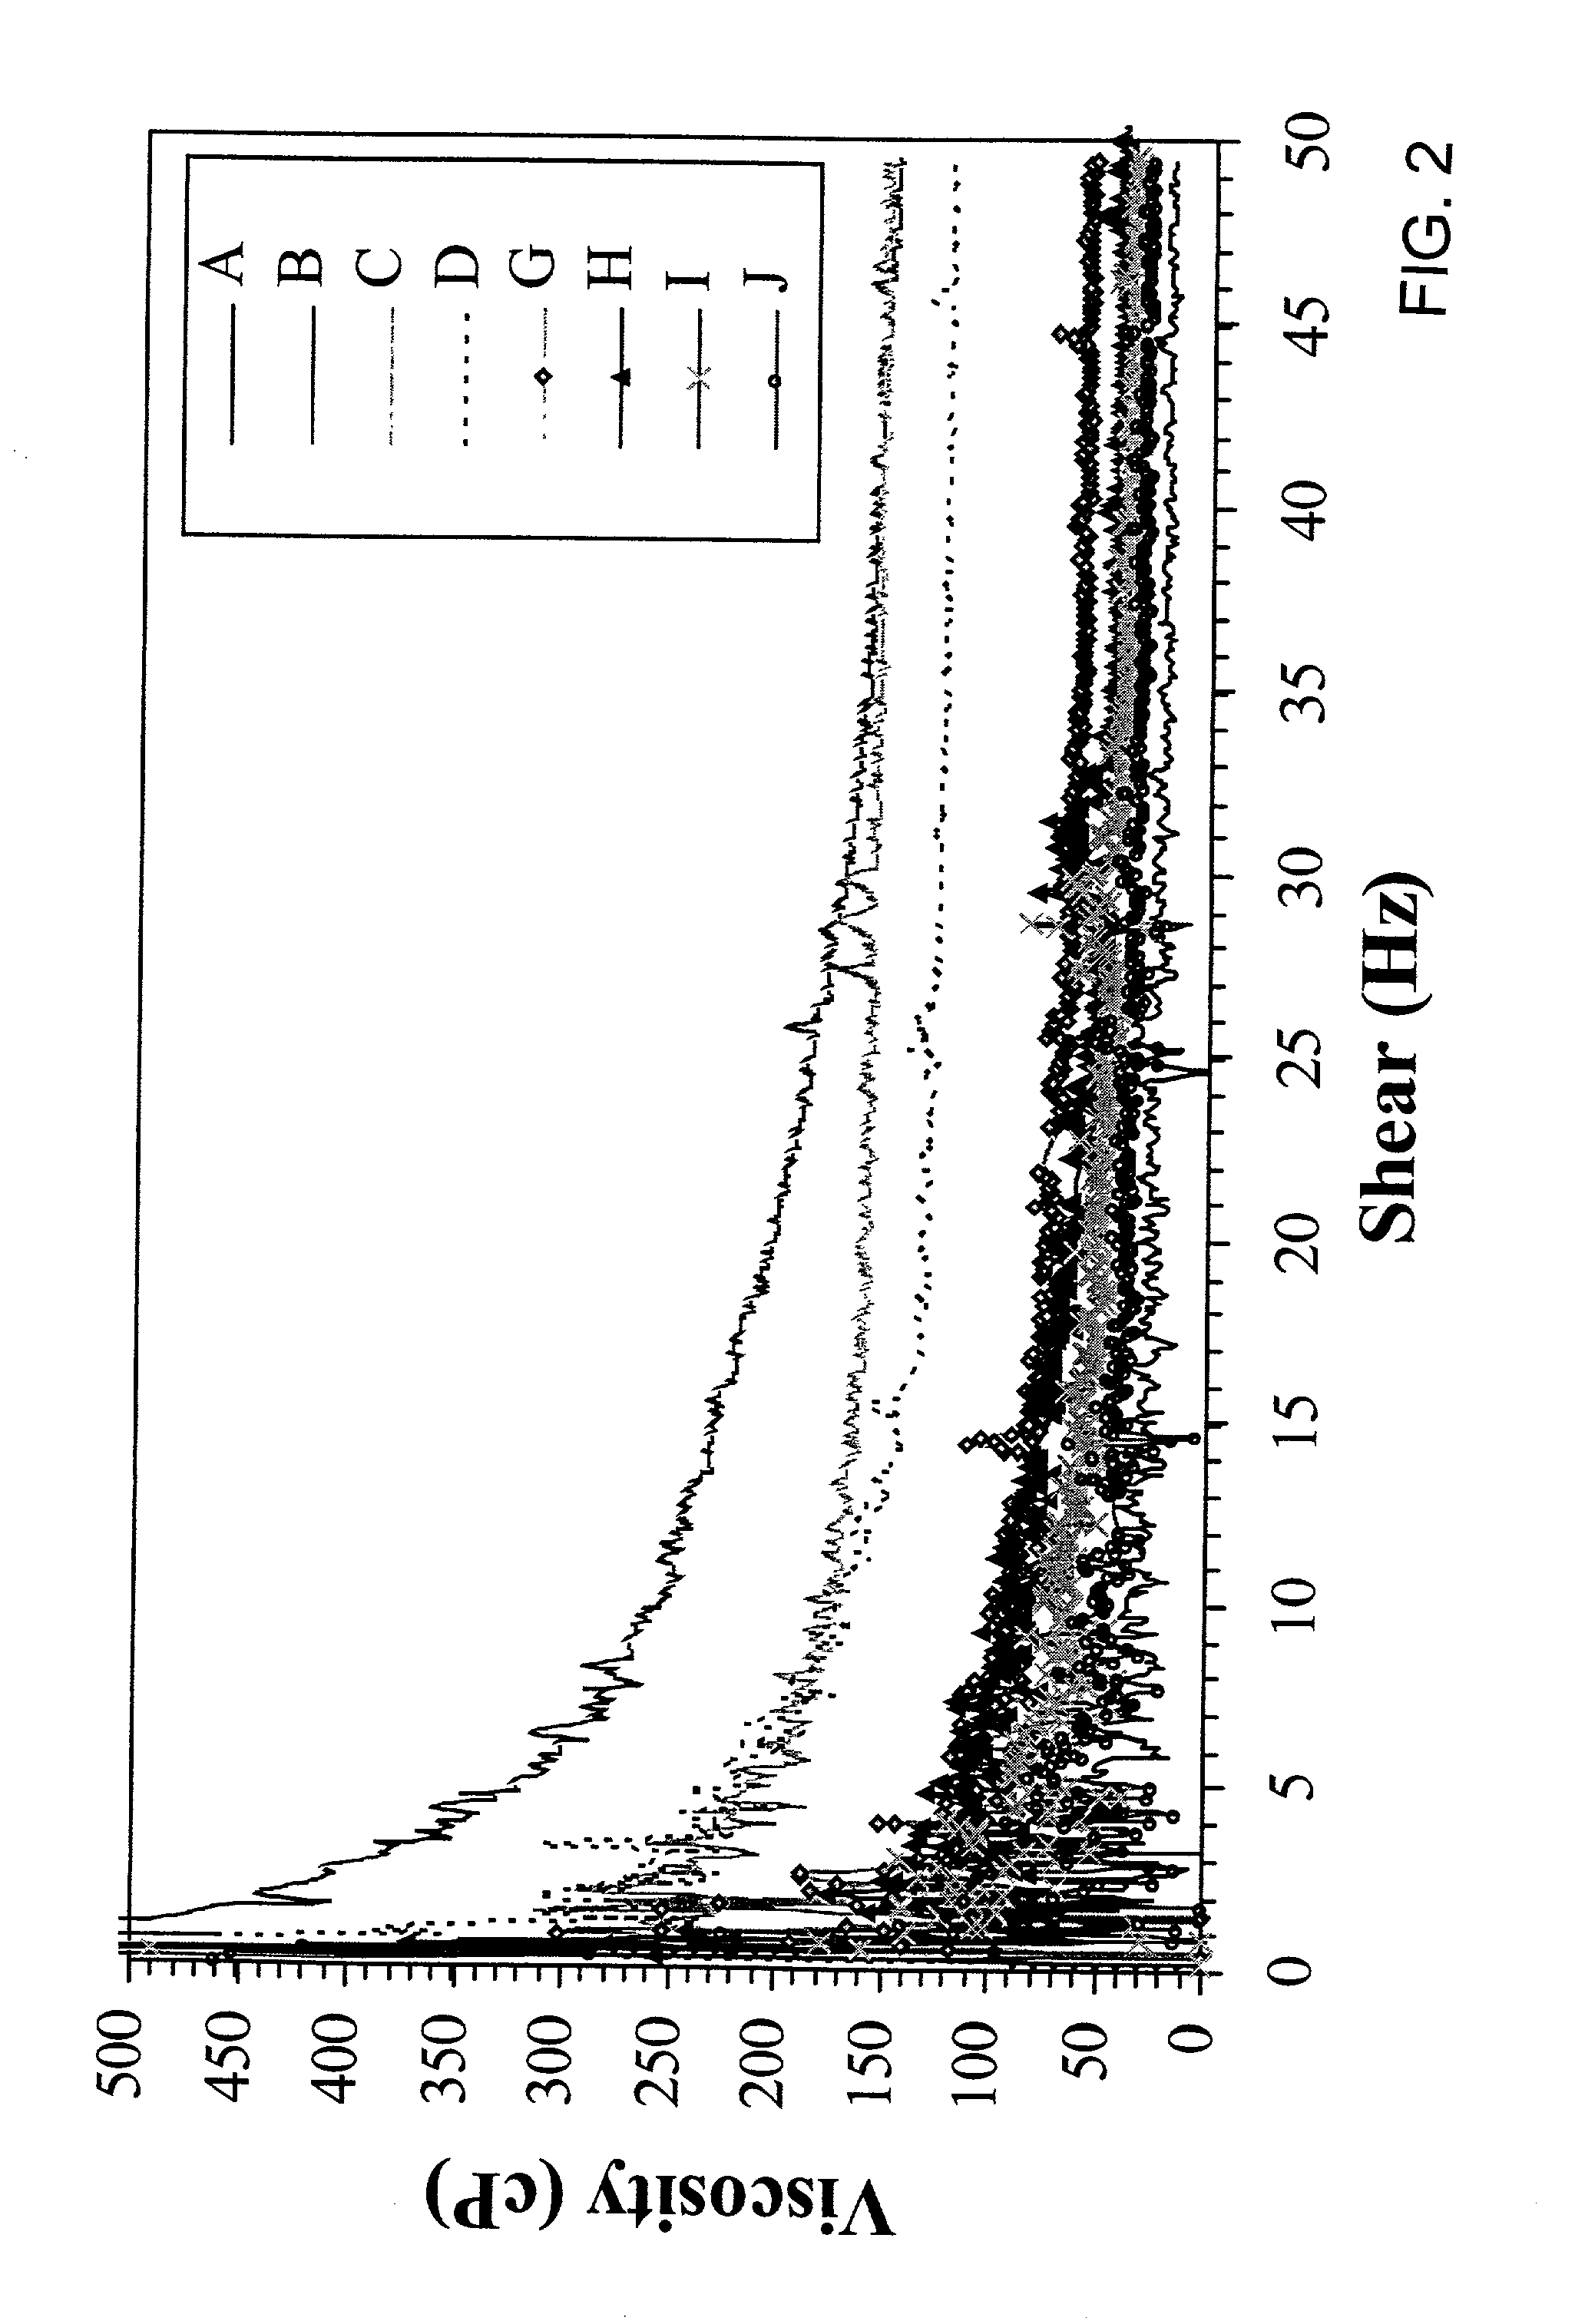 Absorbent articles with simplified compositions having good stability